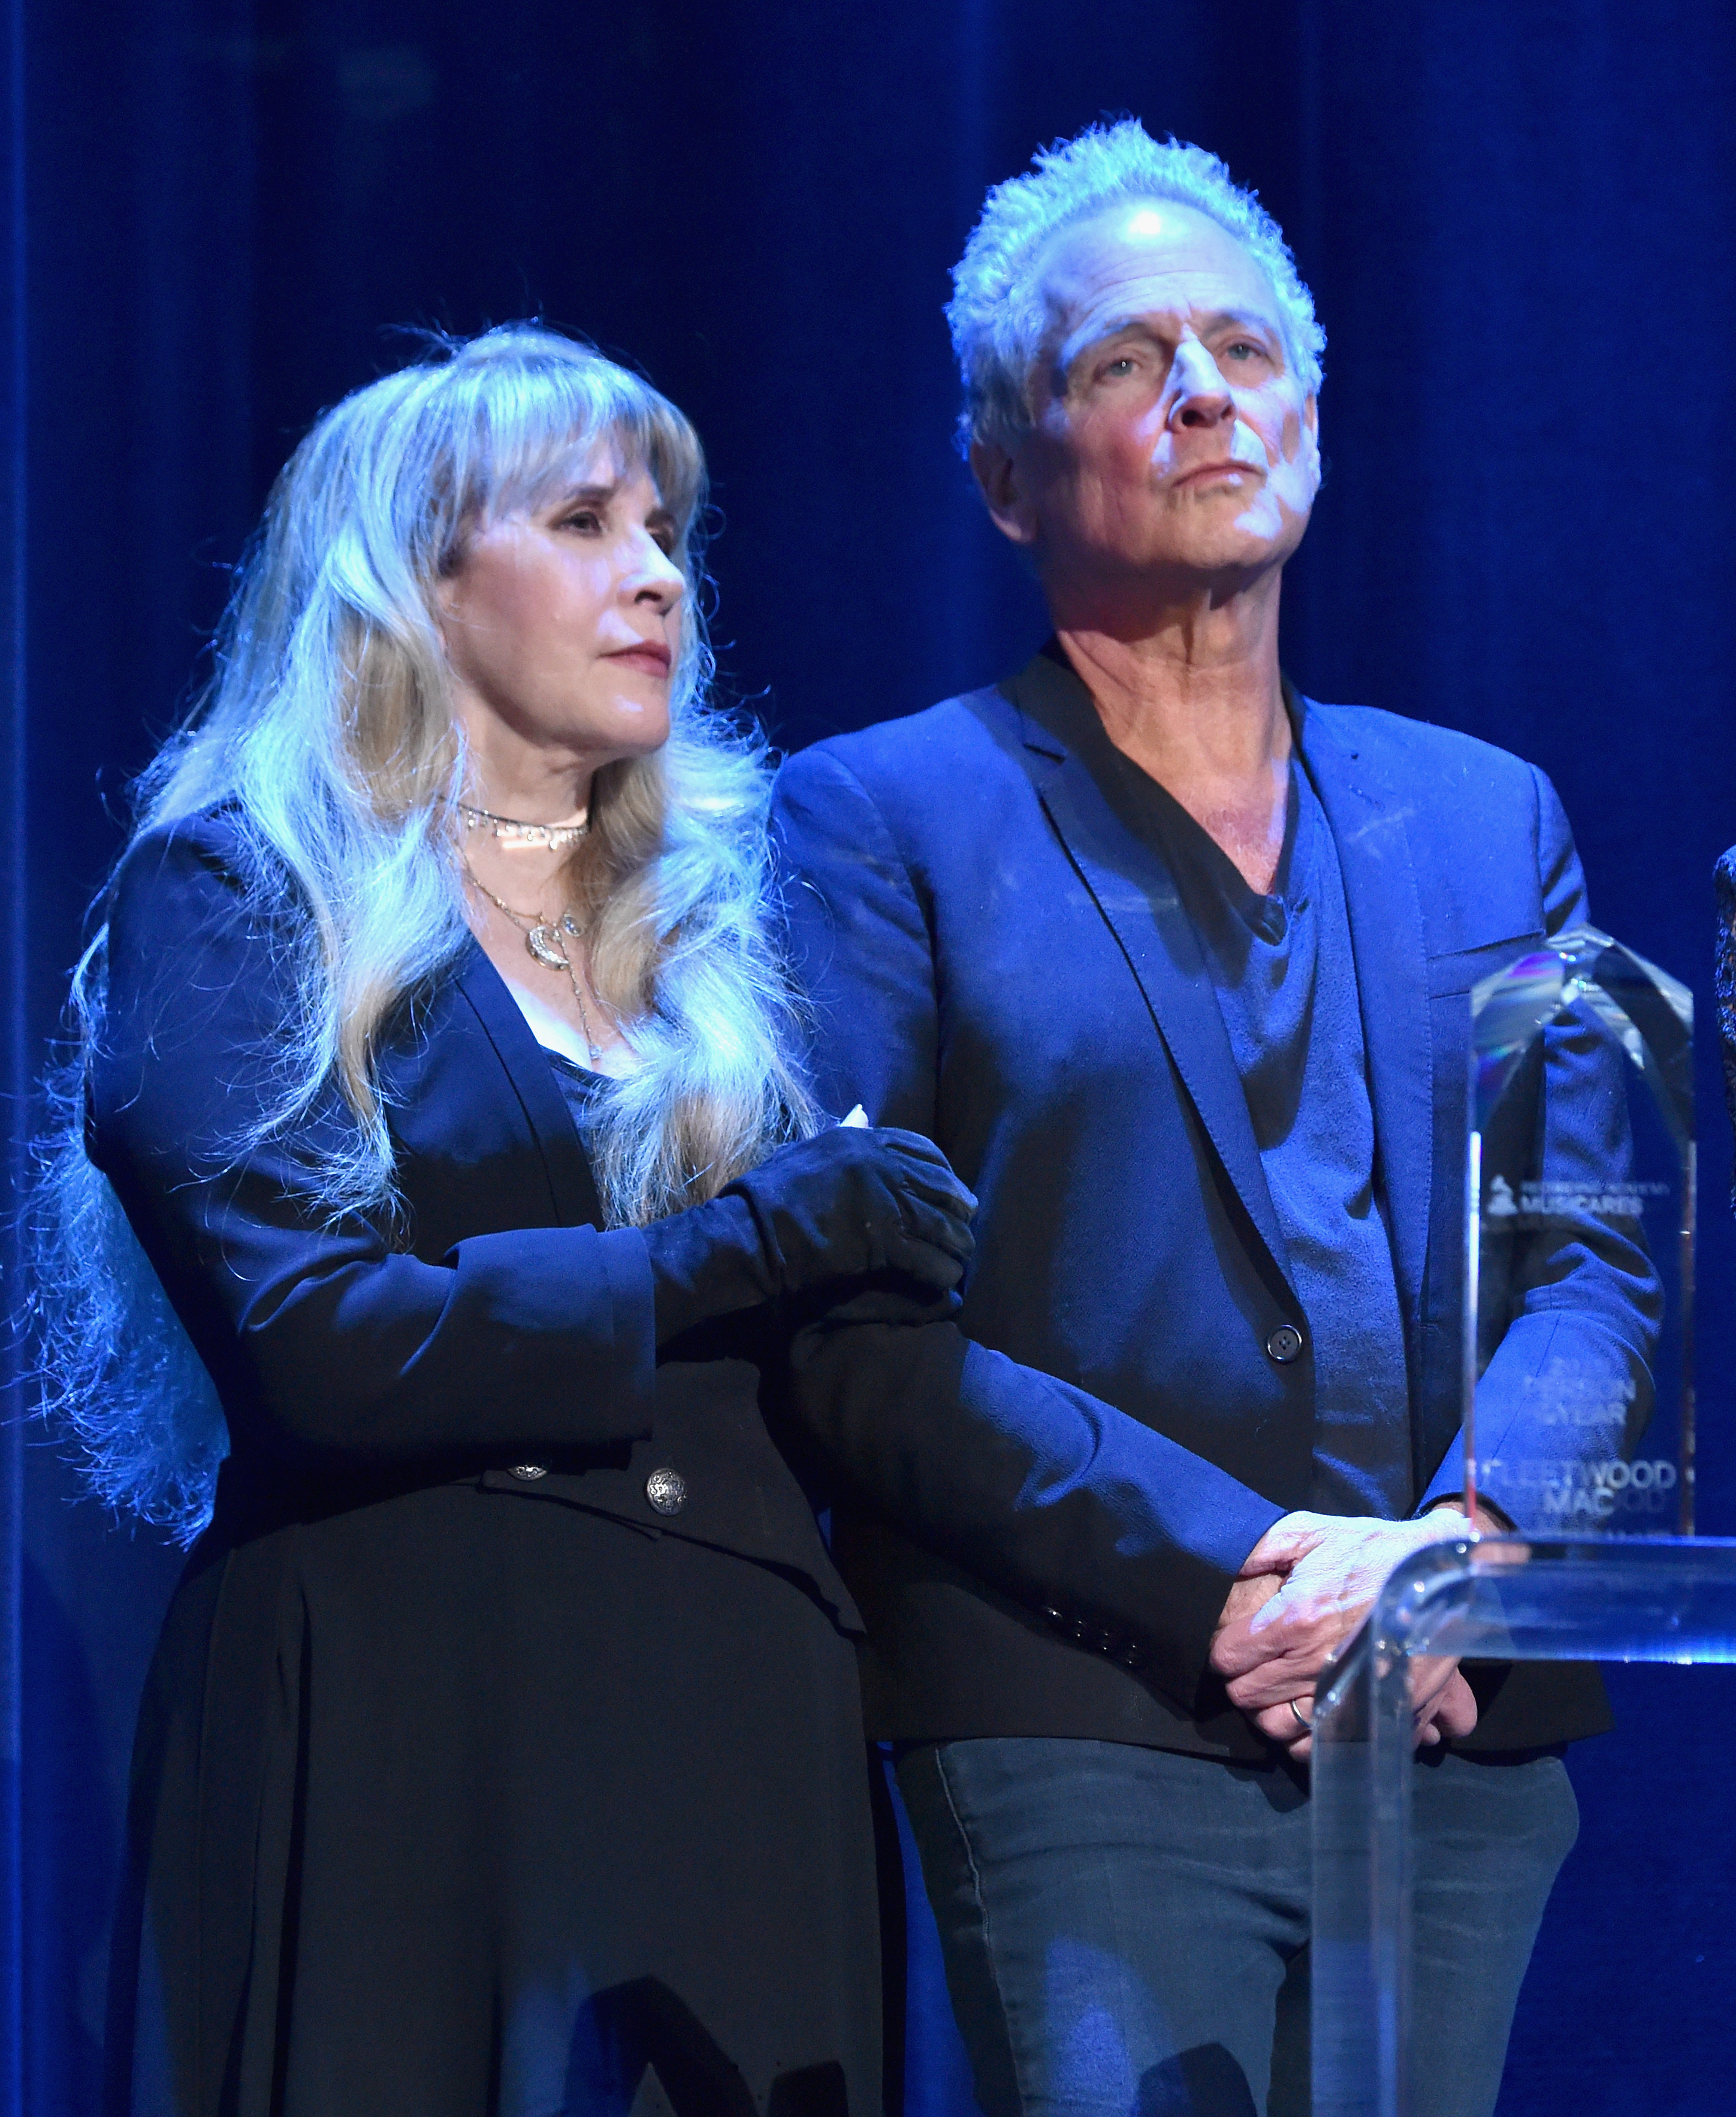 Stevie Nicks and Lindsey Buckingham onstage during MusiCares Person of the Year honoring Fleetwood Mac at Radio City Music Hall on January 26, 2018, in New York City | Source: Getty Images